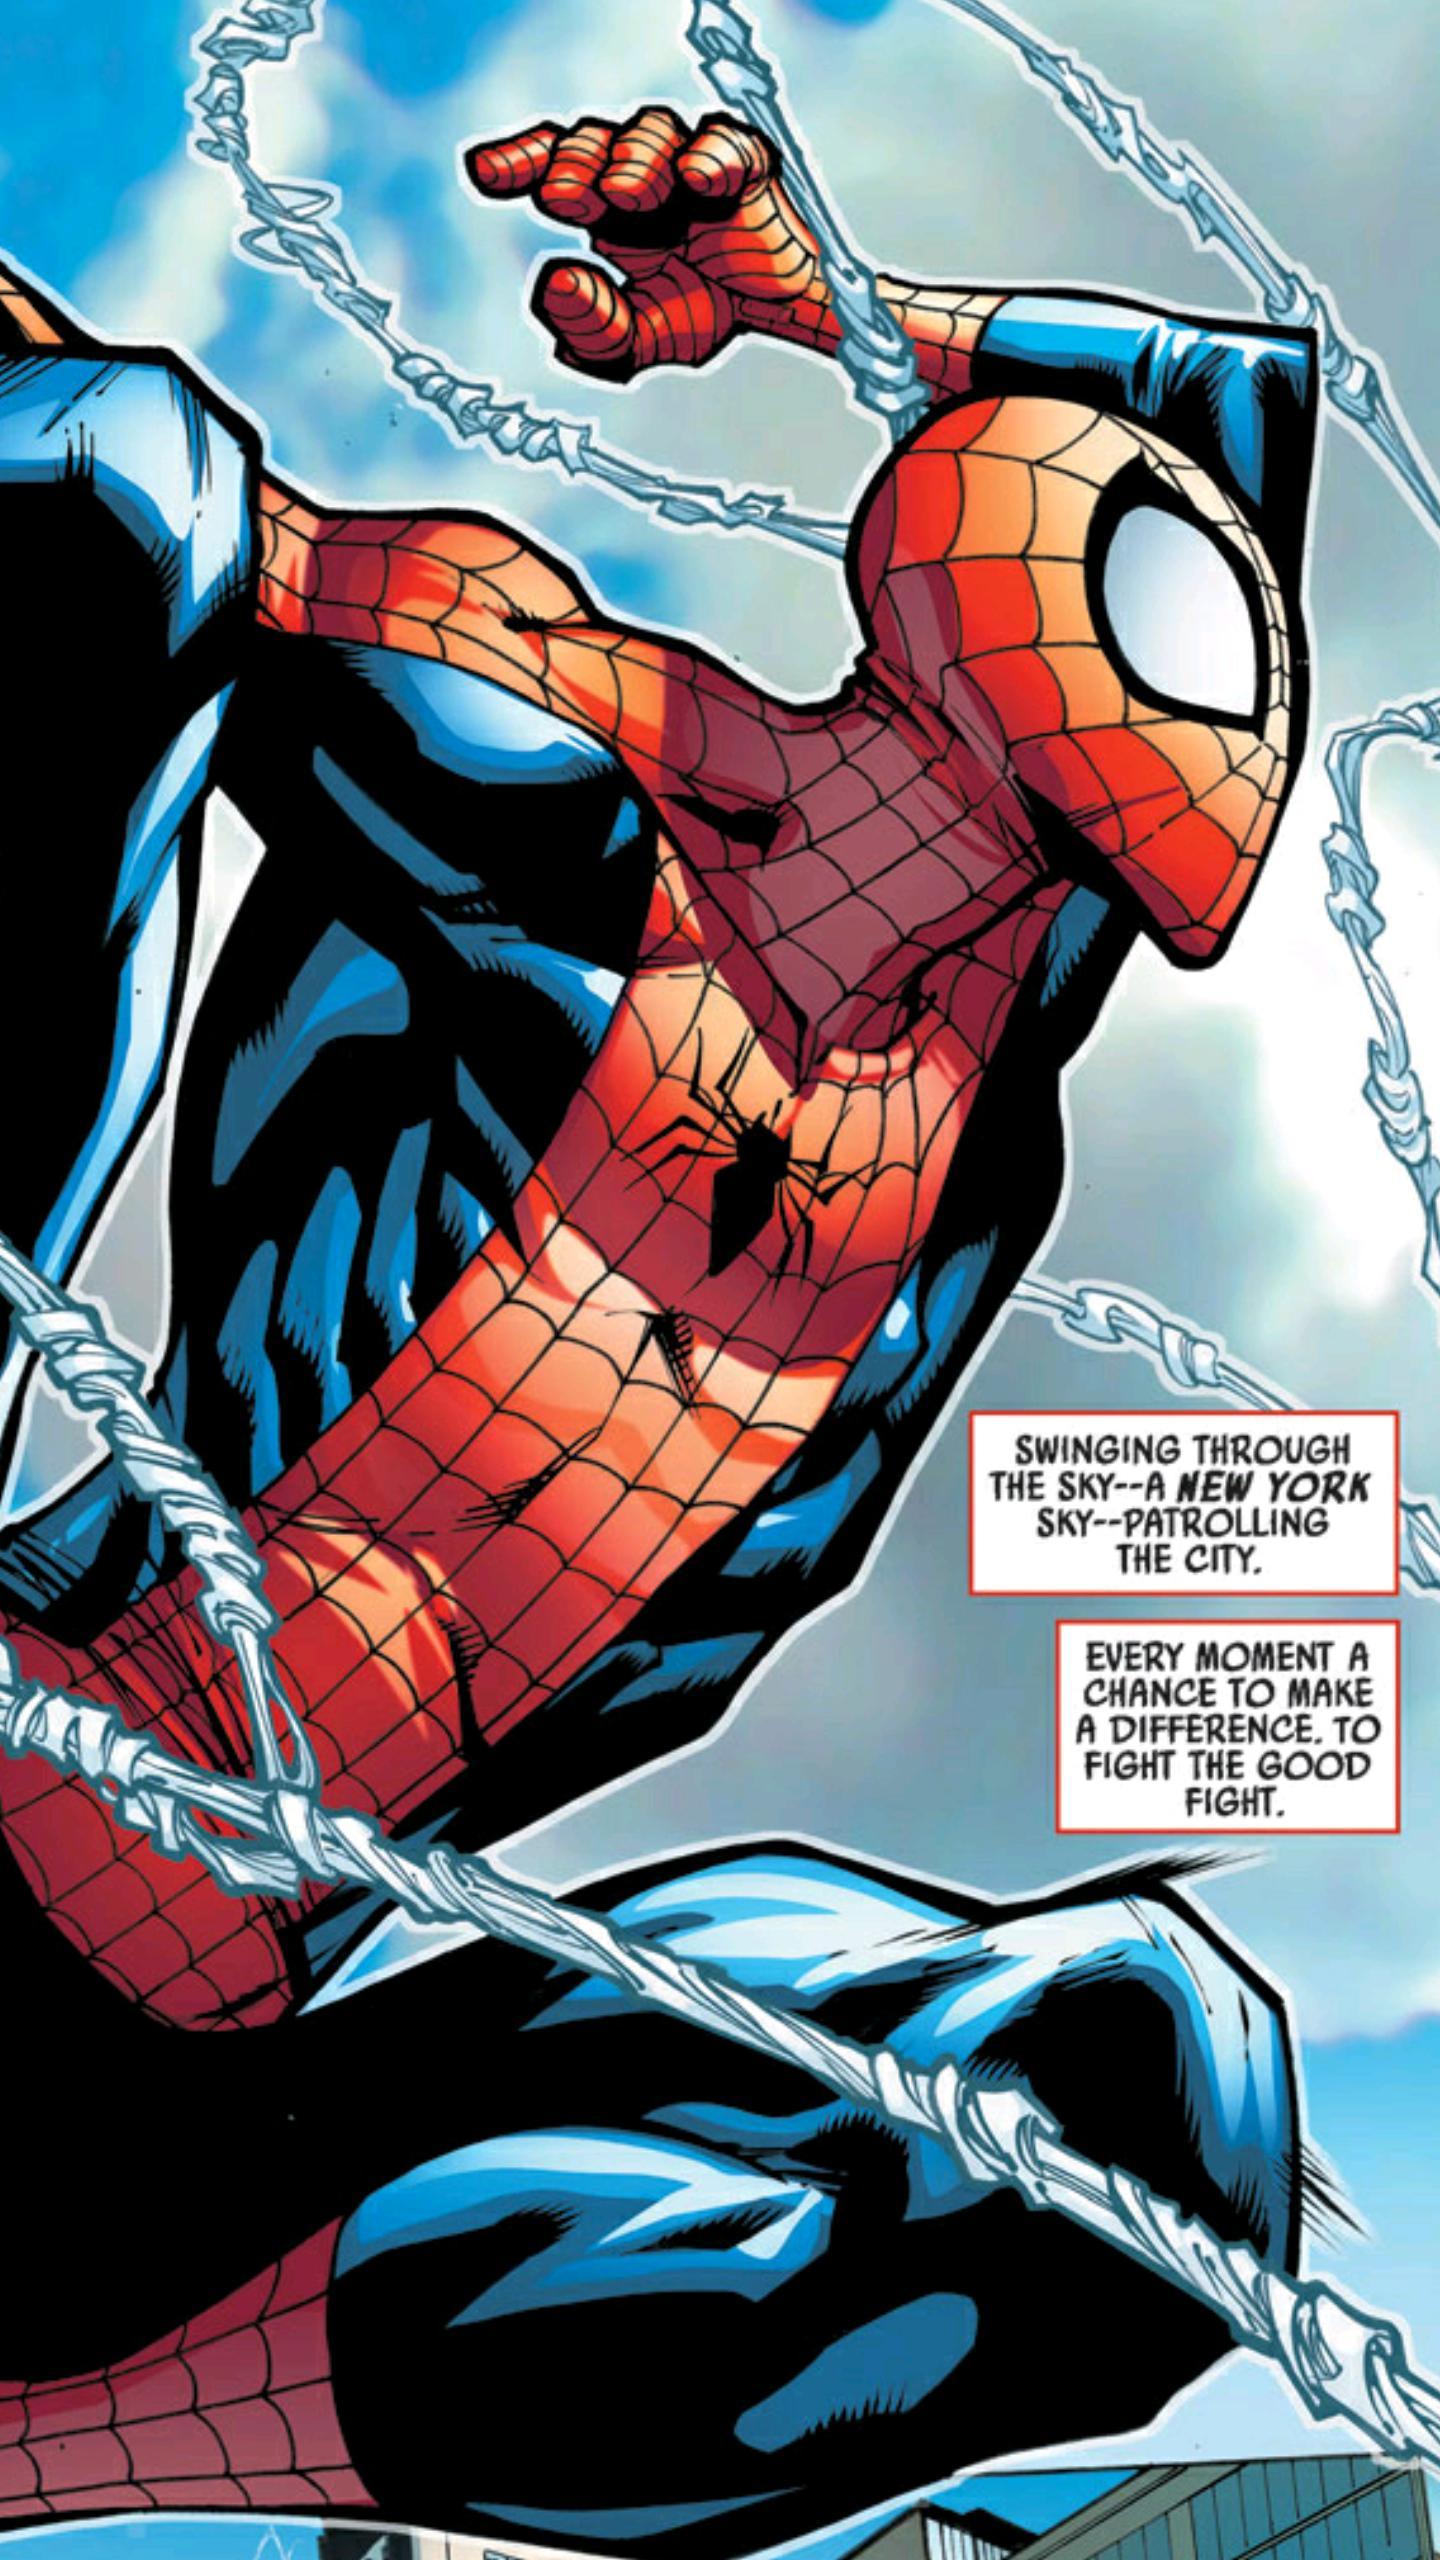 Marvel Unlimited is great for getting the perfect Spider